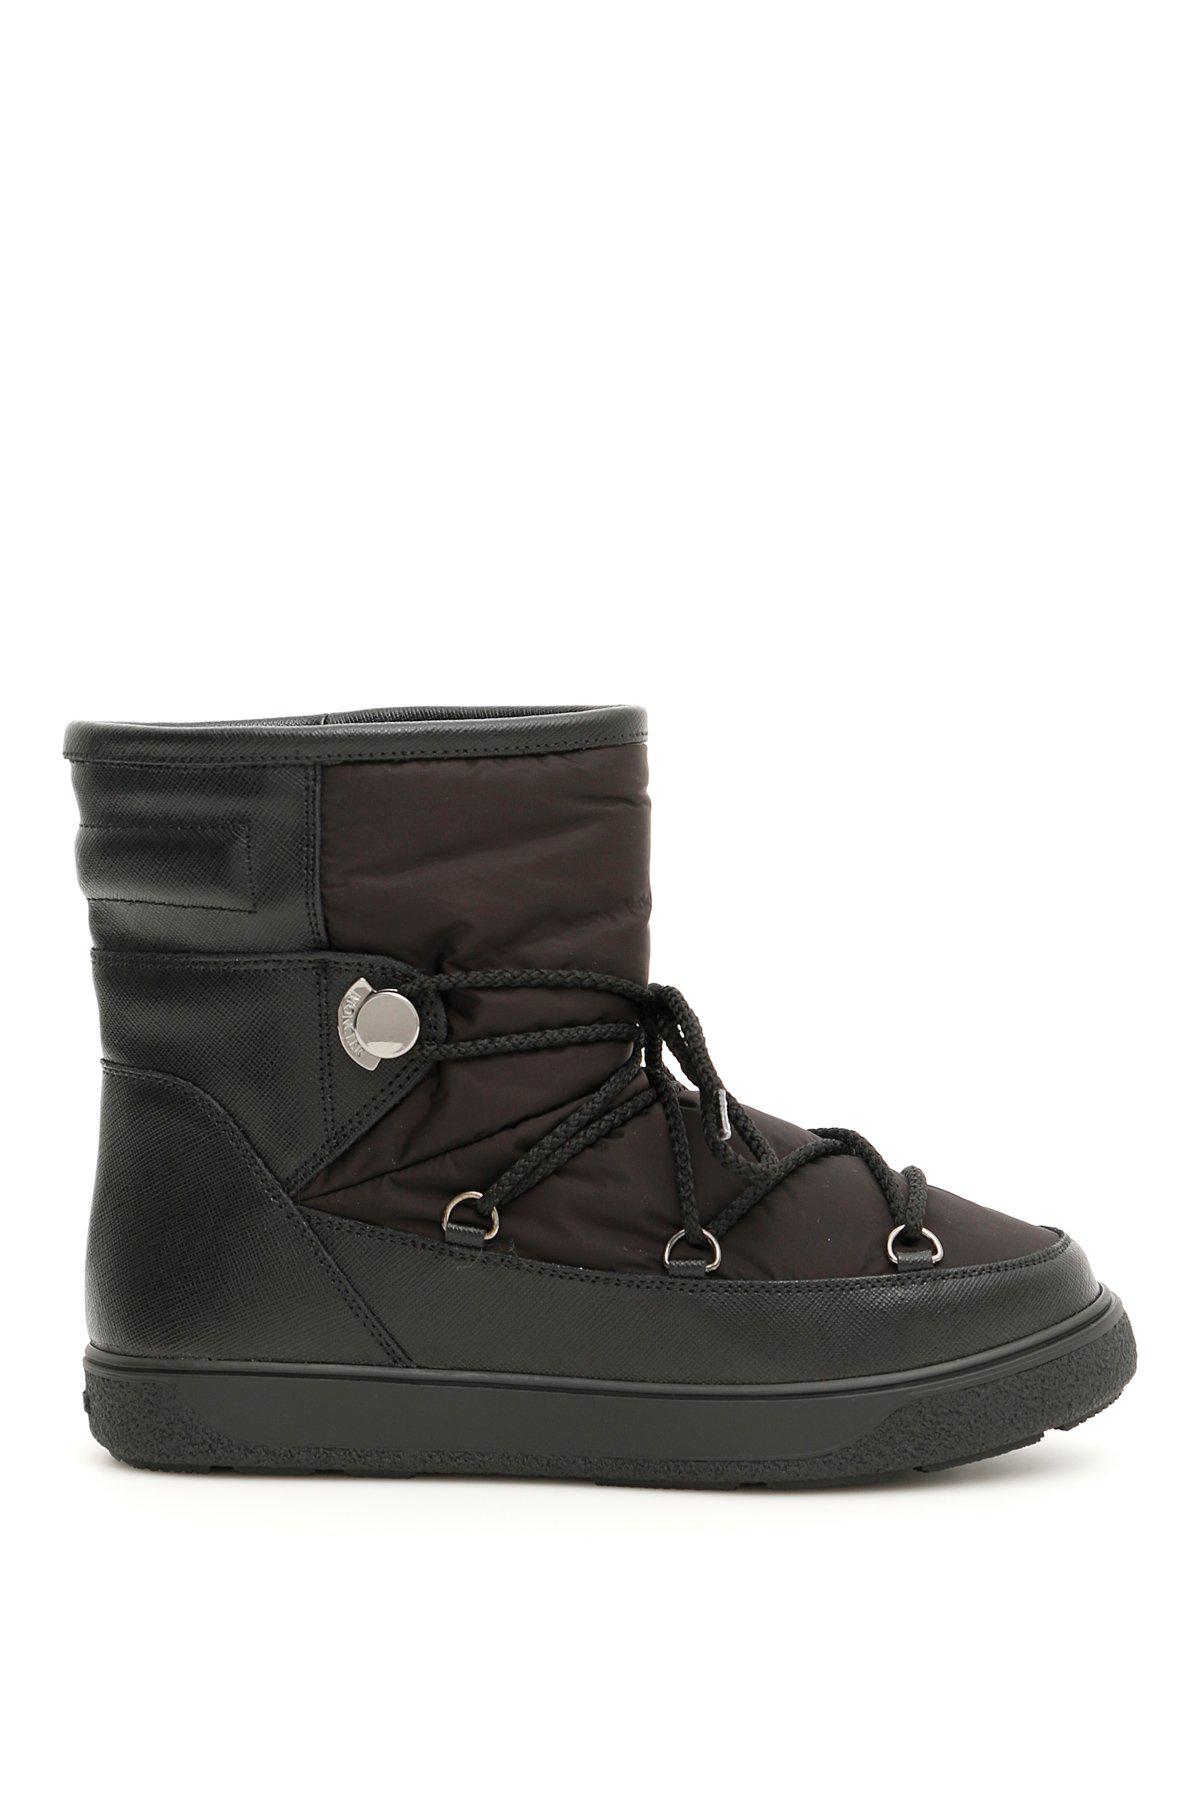 Moncler Stephanie Shell And Leather Boots in Black - Lyst